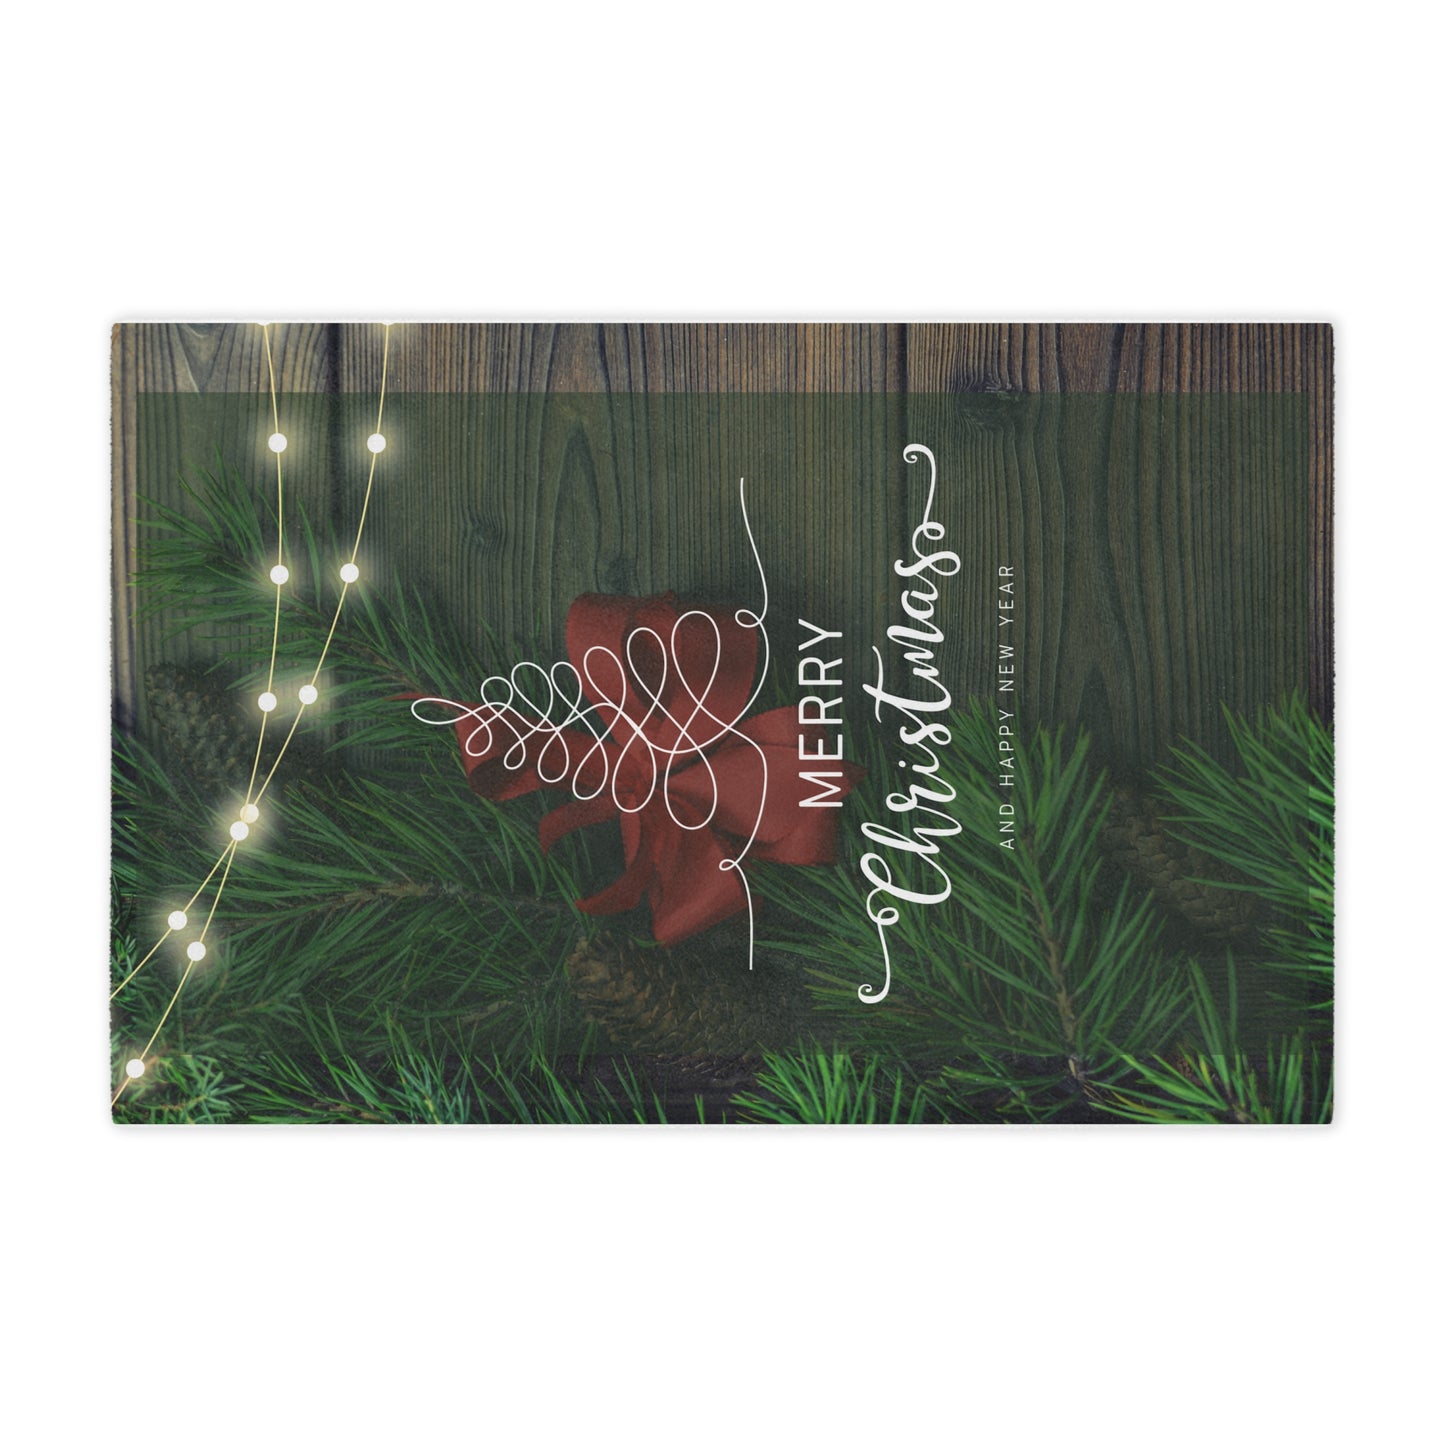 Merry Christmas with Heappy New Year Printed Velveteen Minky Blanket